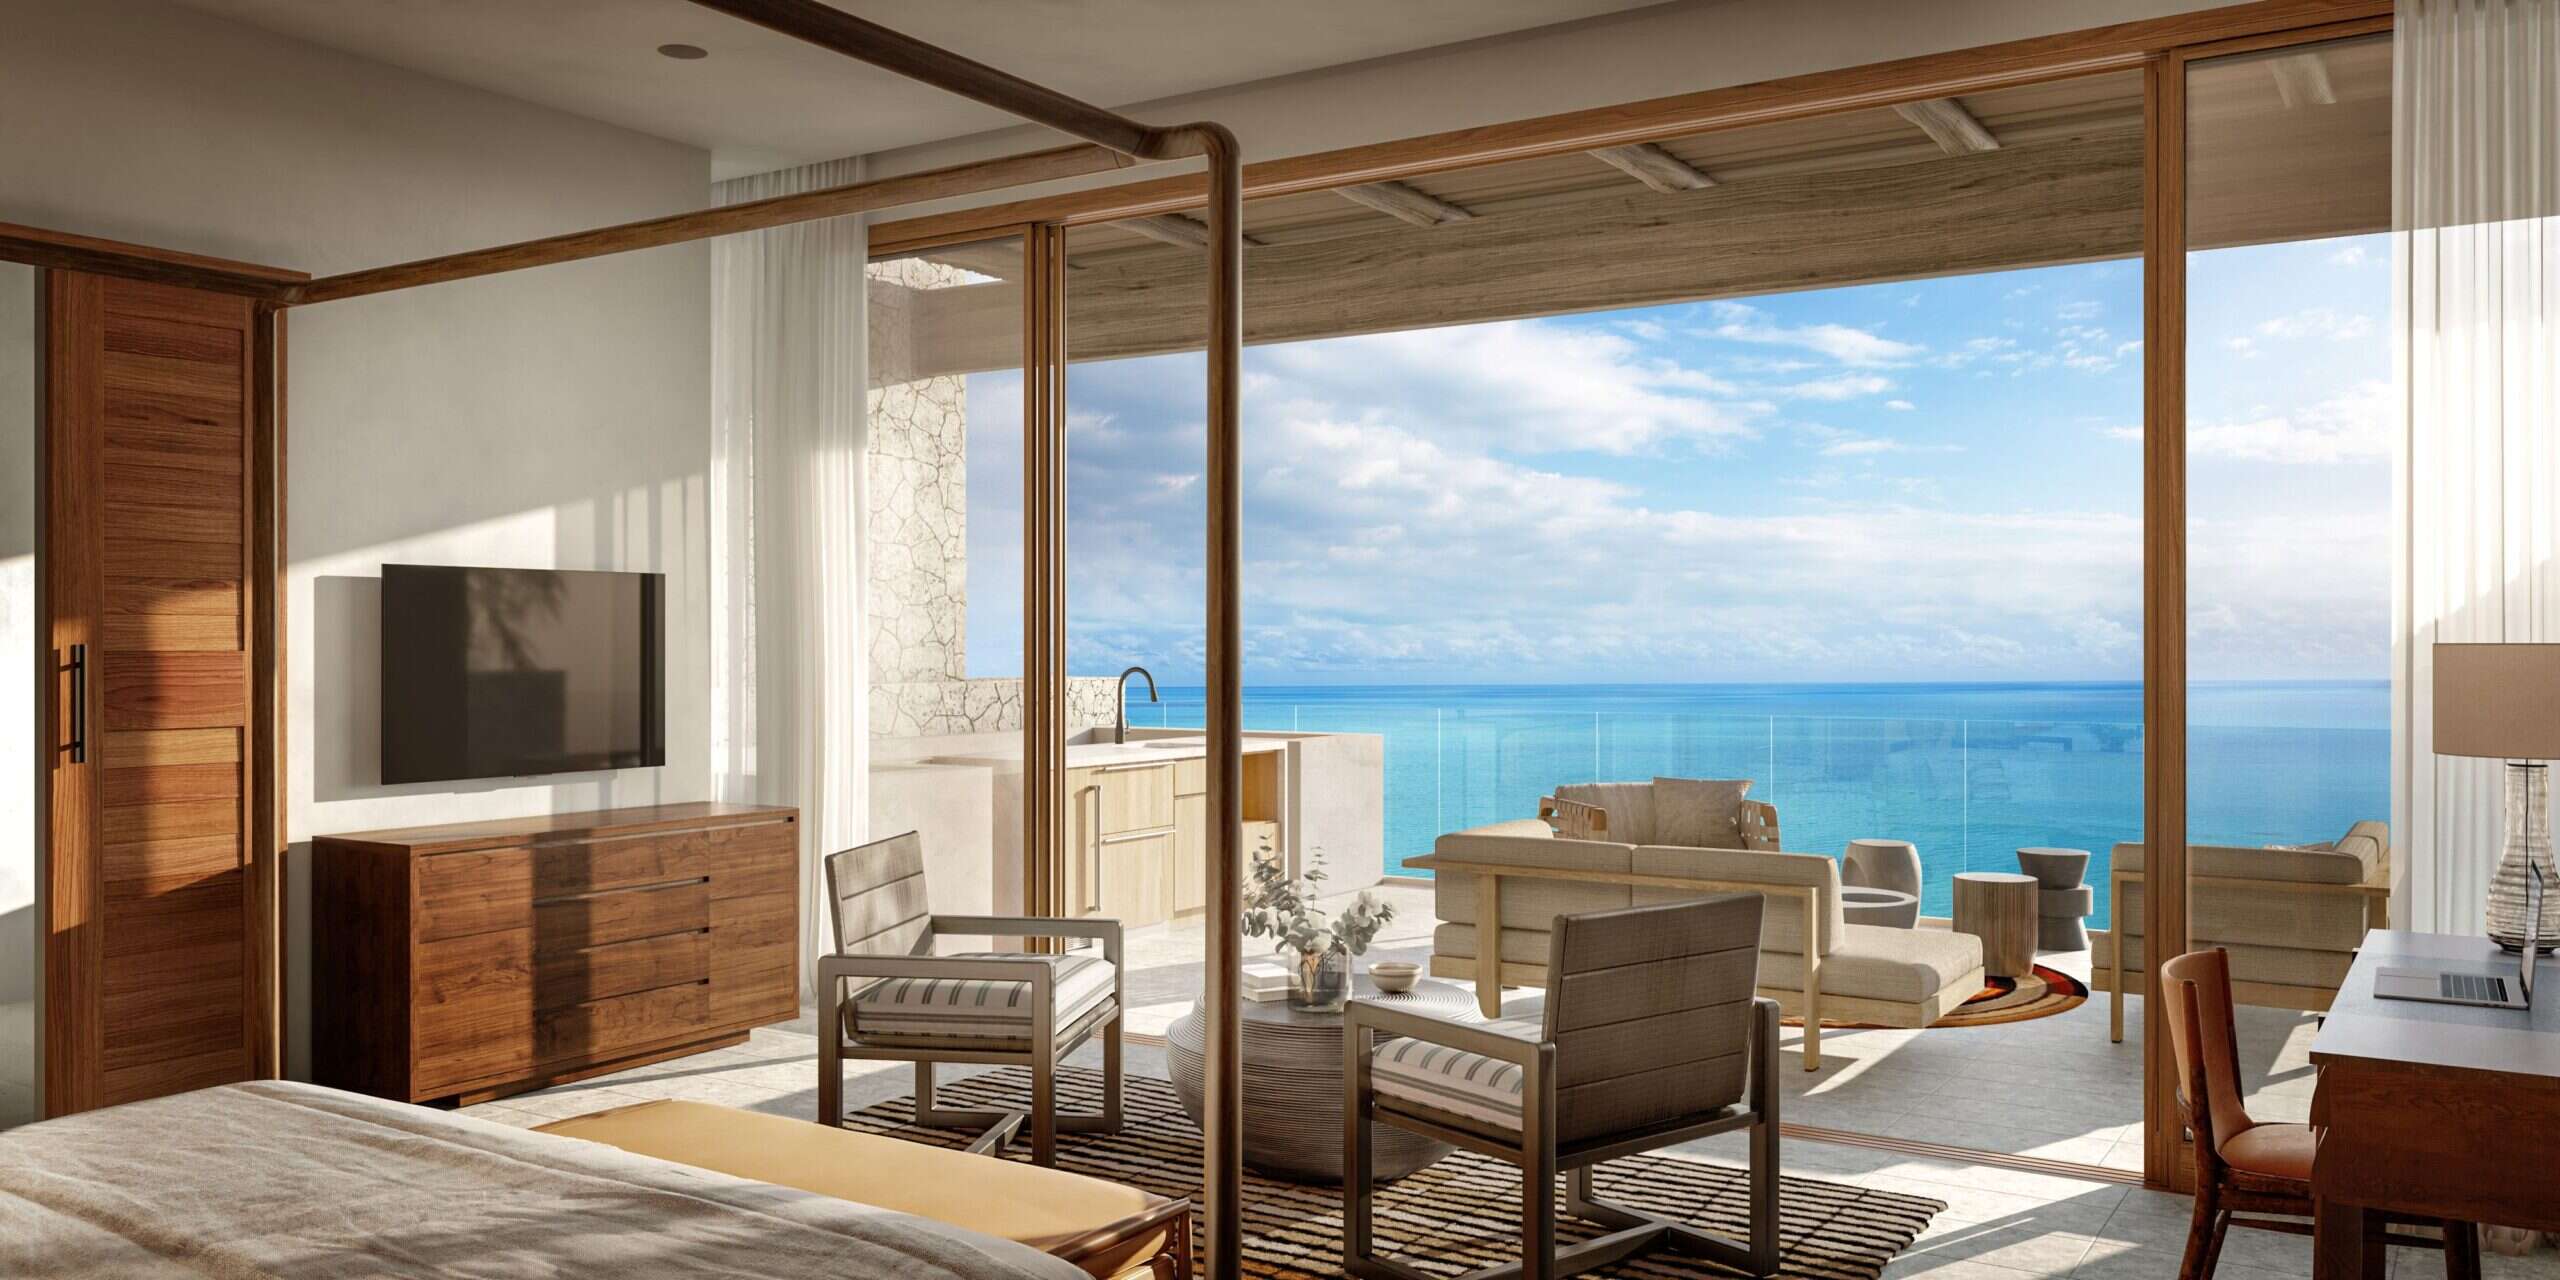 Primary suite of Turks and Caicos property